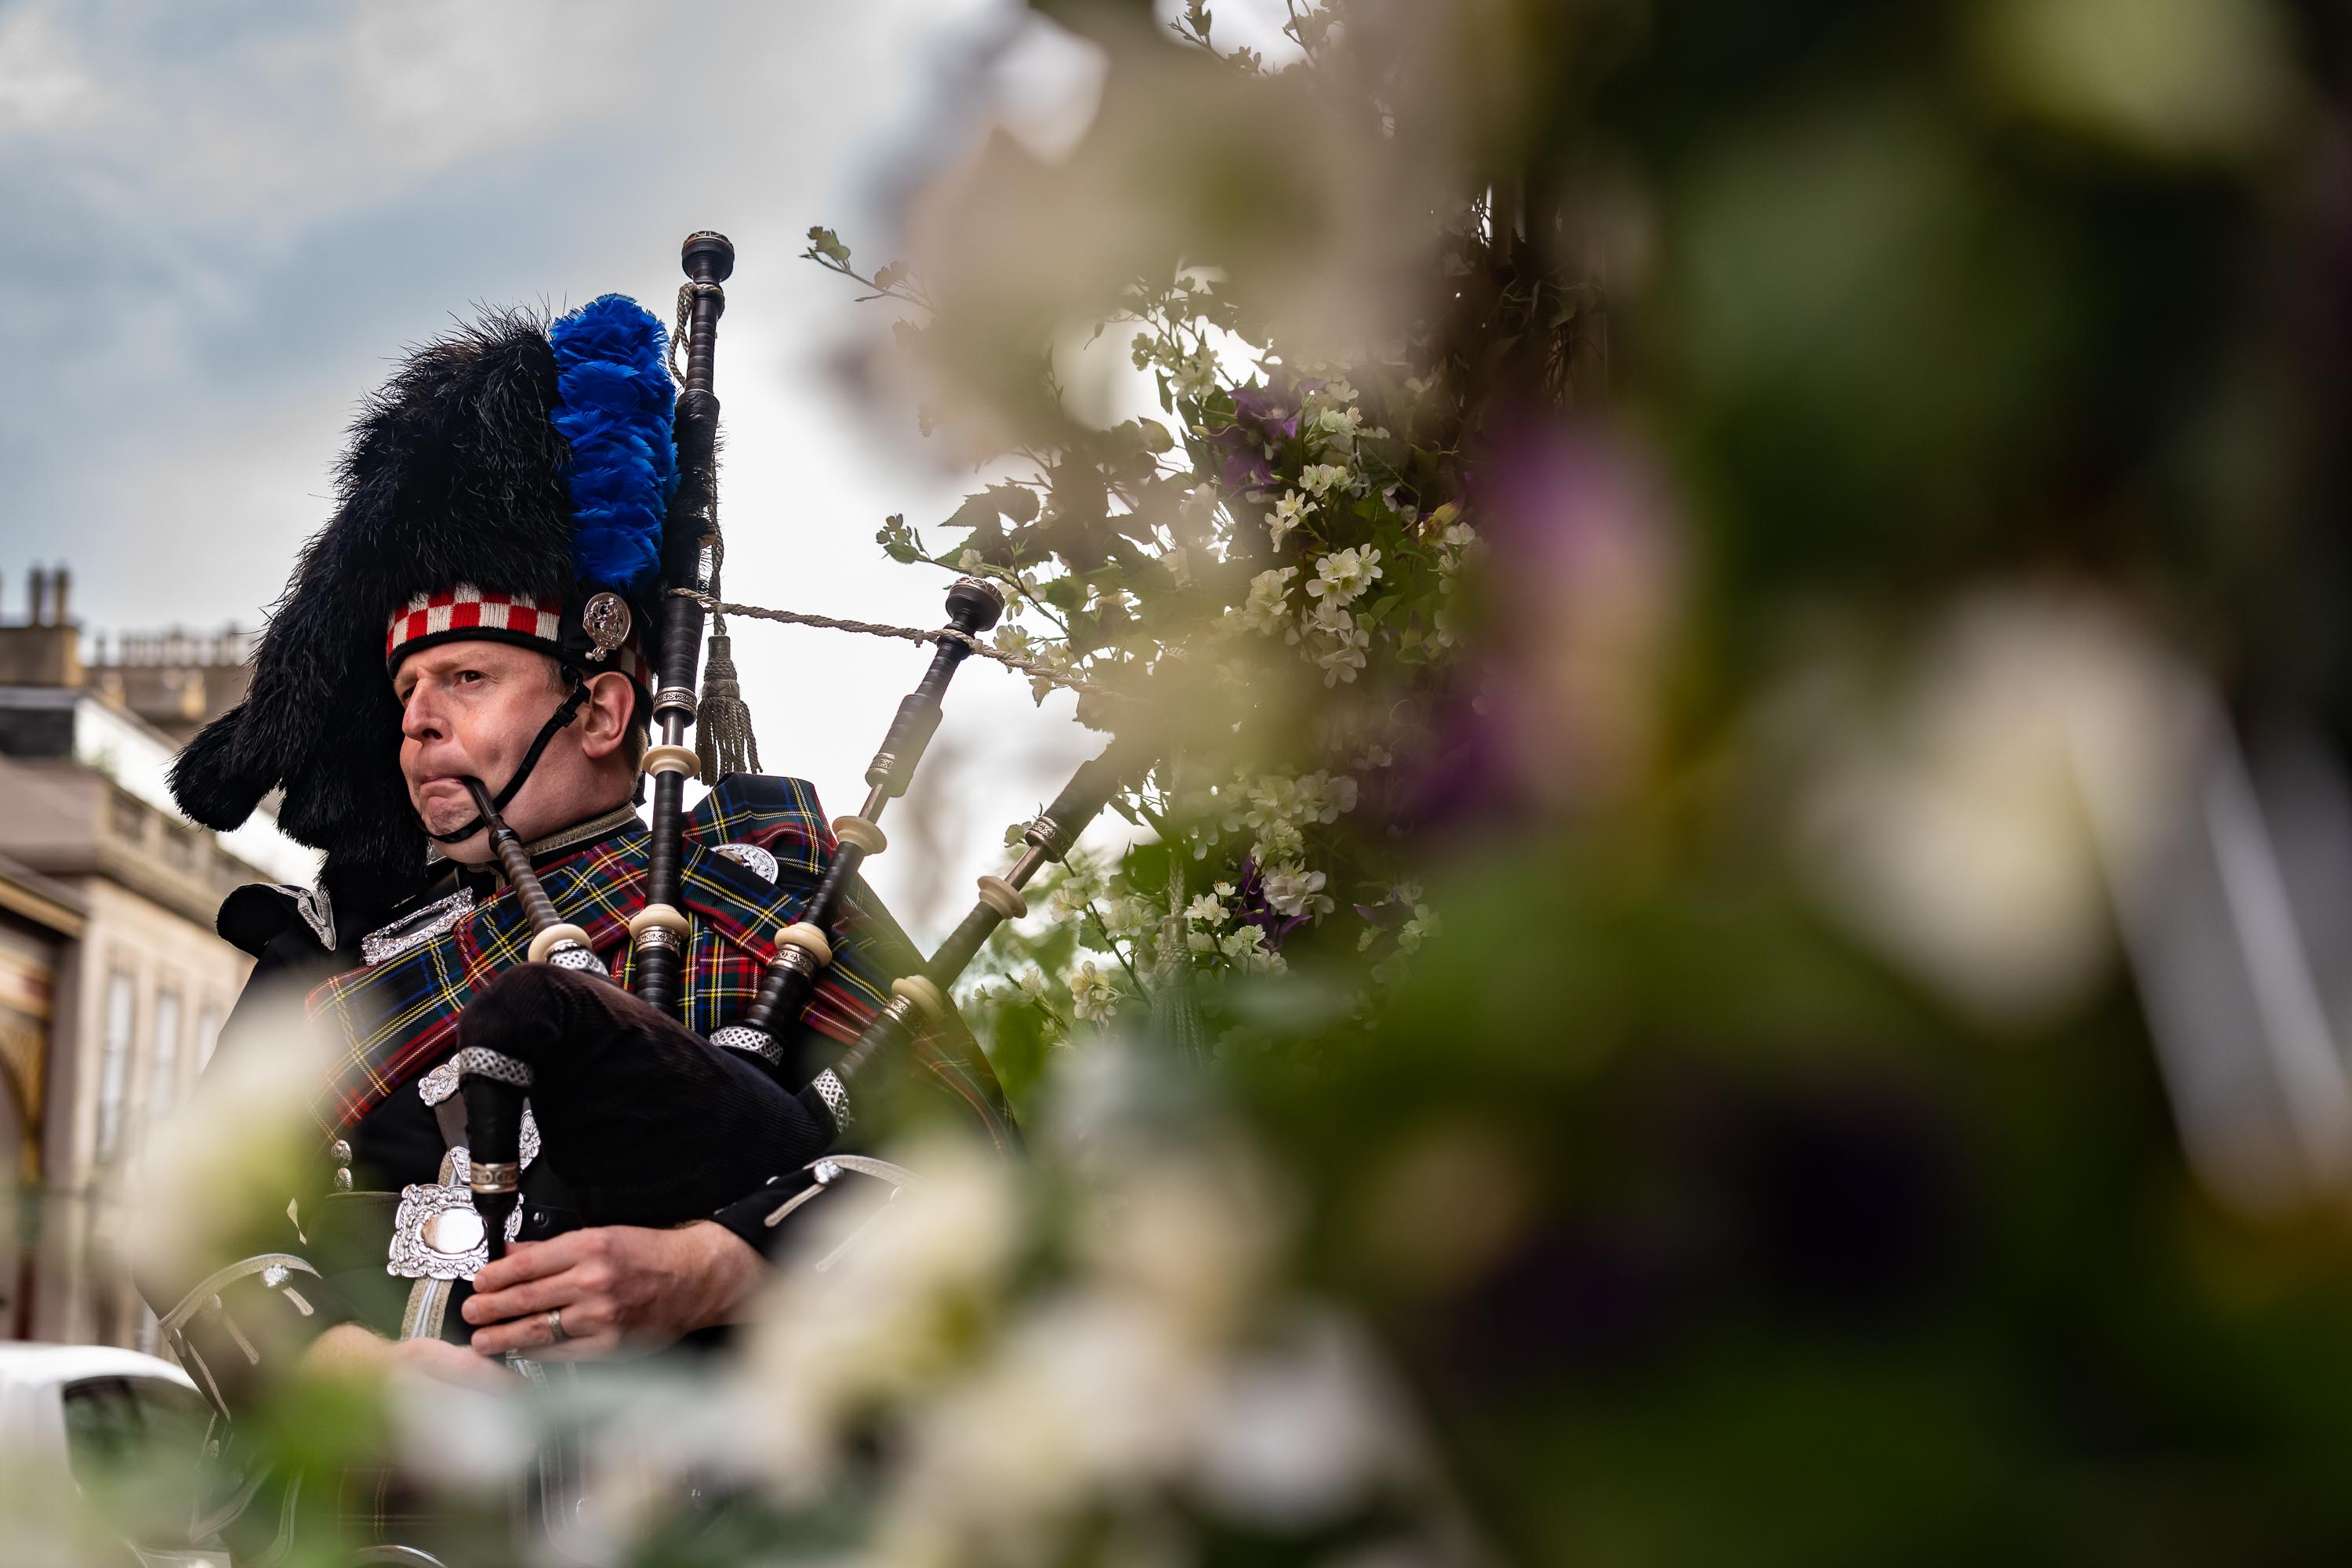 What’s Scotland without a bagpiper? 